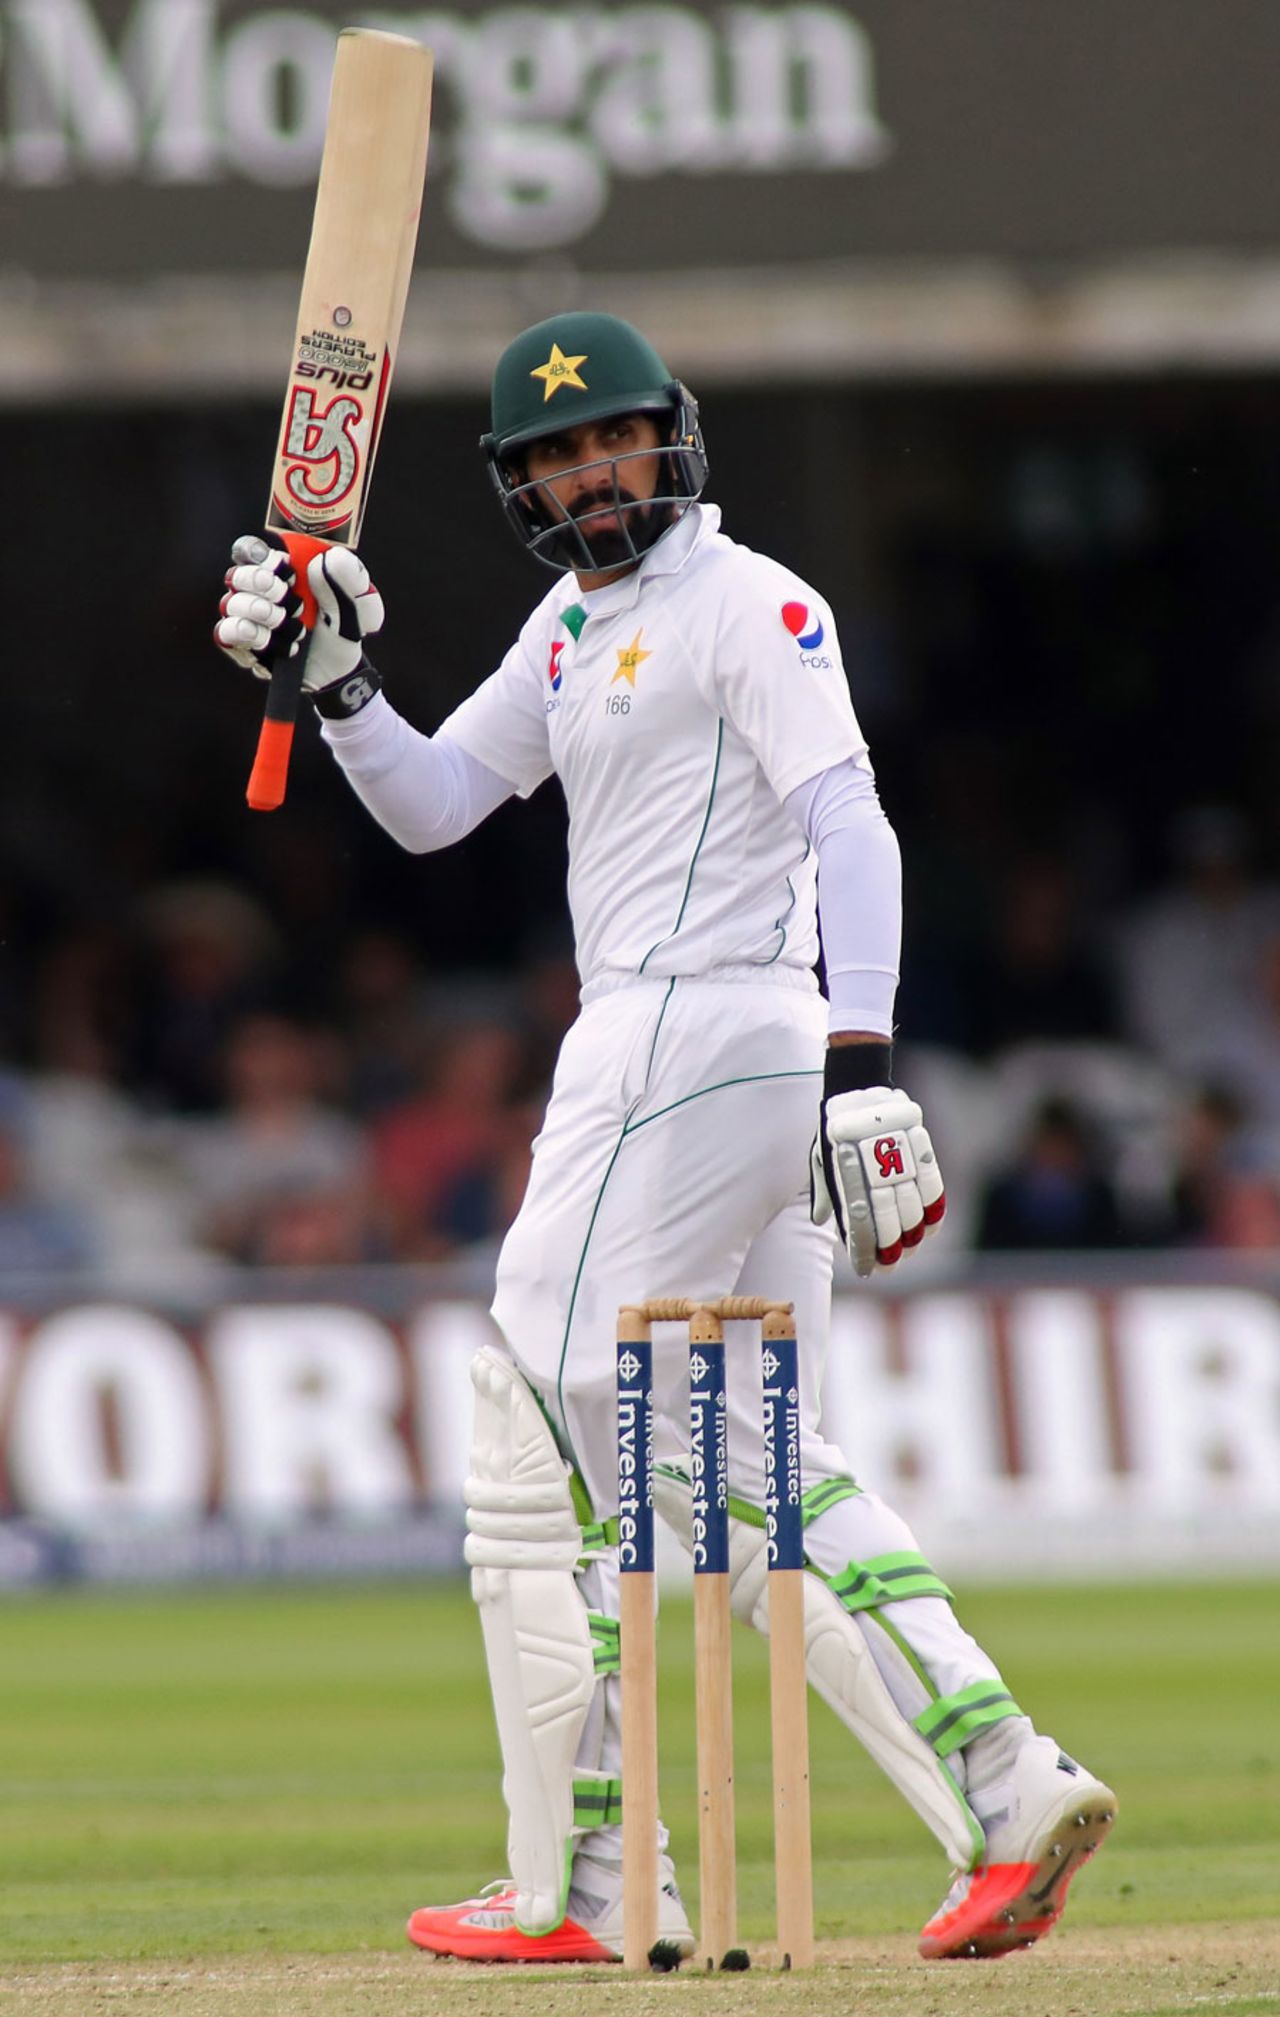 Misbah-ul-Haq reached a half-century, England v Pakistan, 1st Investec Test, Lord's, 1st day, July 14, 2016